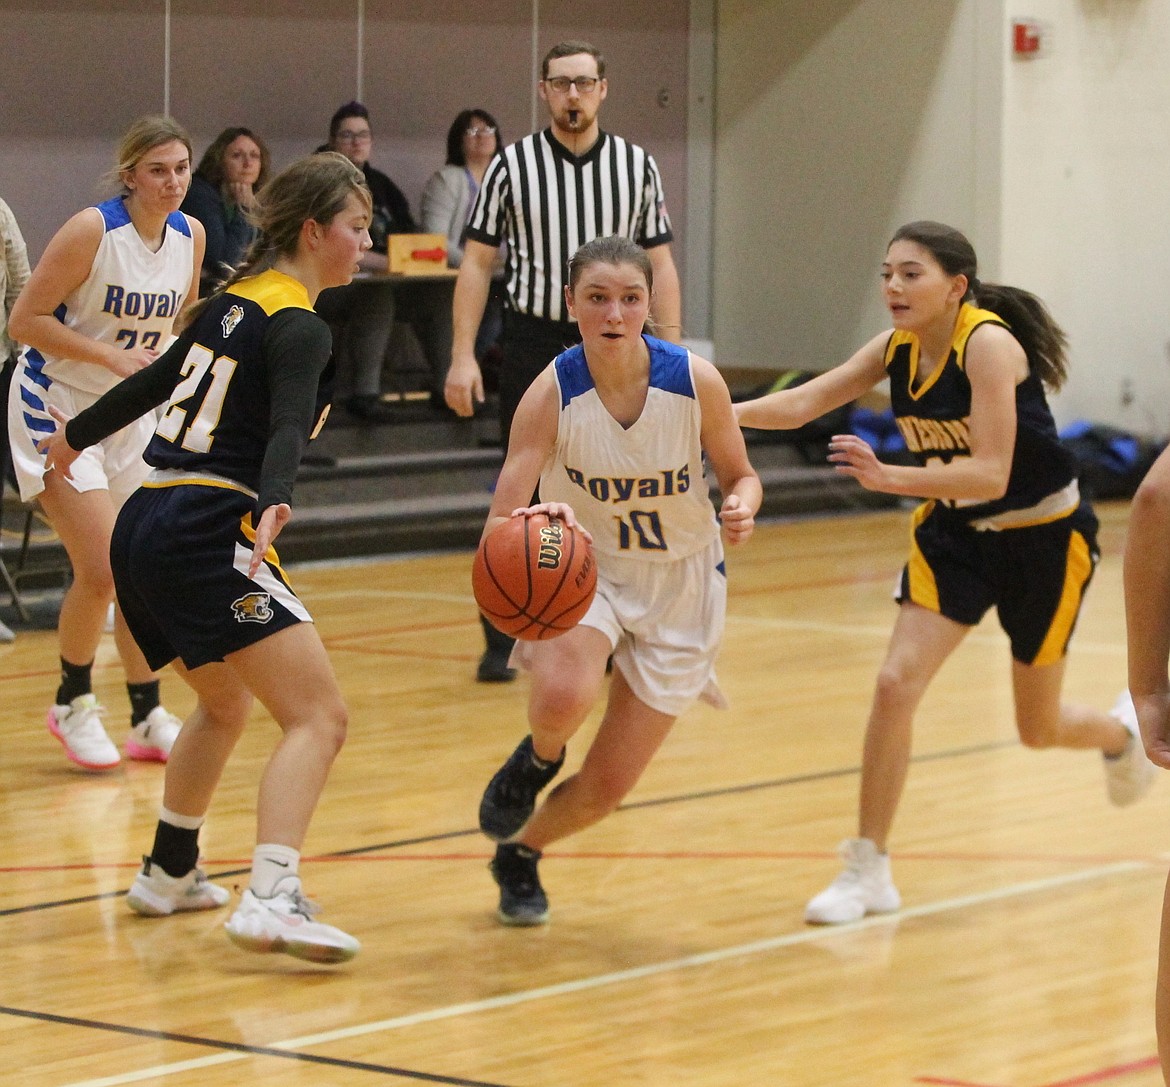 MARK NELKE/Press
Danica Kelly (10) of North Idaho Christian drives between Katie Yount, left, of Genesis Prep and Summer Nelke of Genesis Prep on Friday at Holy Family Catholic School in Coeur d'Alene.